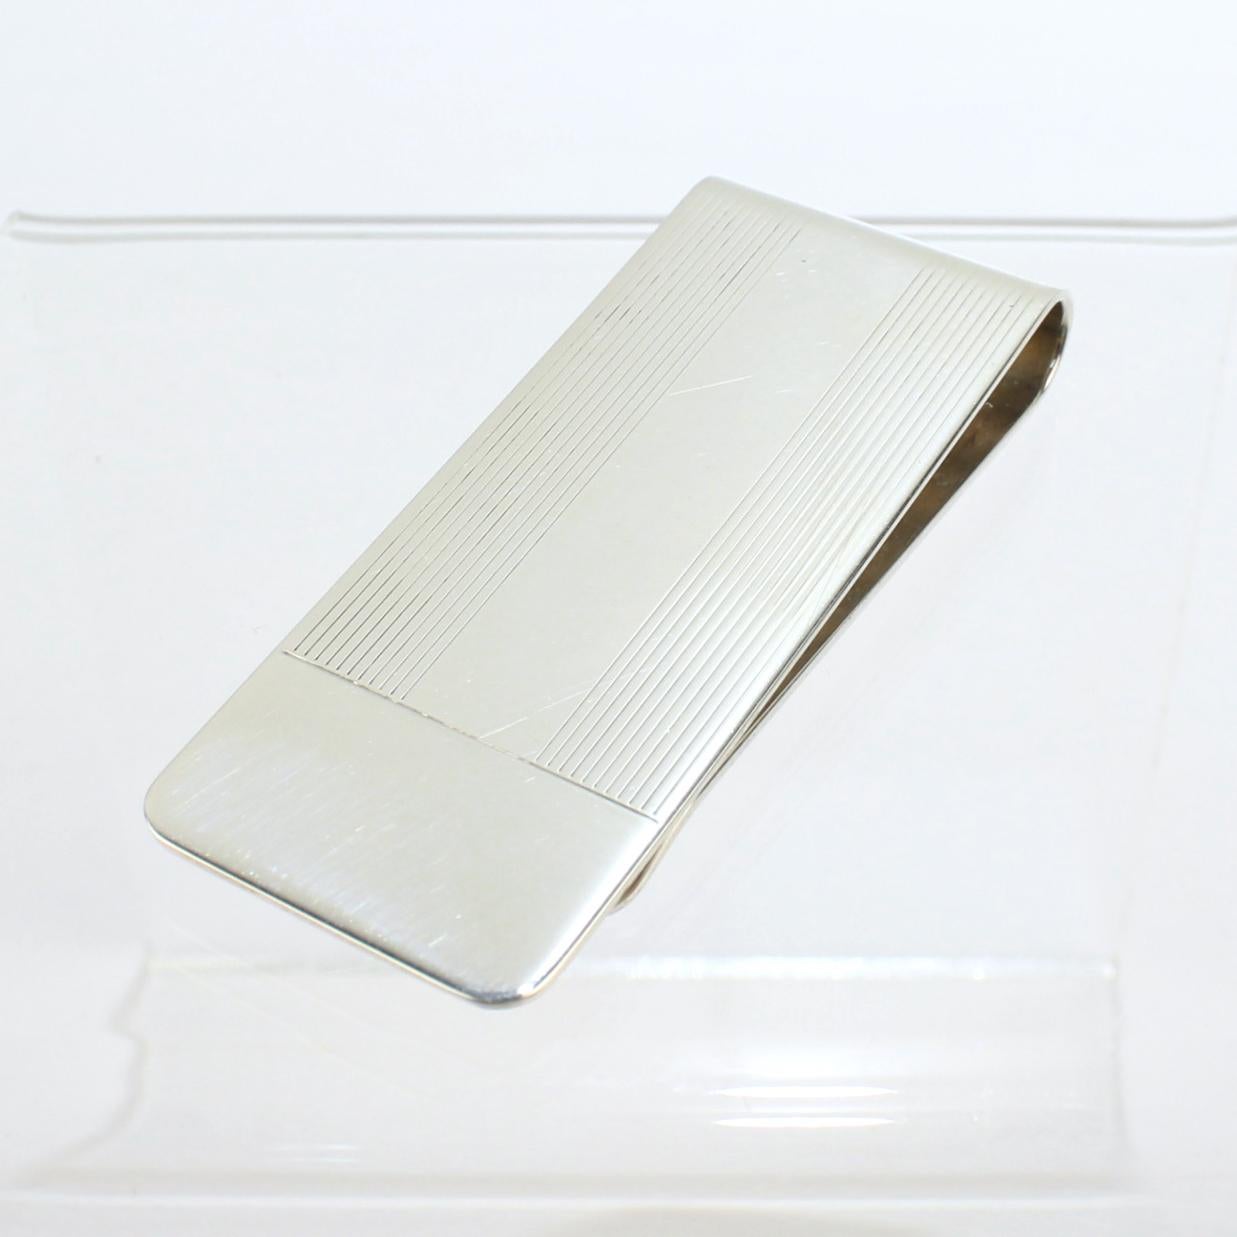 A very fine Tiffany & Co. money clip.

In sterling silver.

With linear engraved decoration.

A great Tiffany piece for everyday!

Date:
20th Century

Overall Condition:
It is in overall good, as-pictured, used estate condition with some very fine &